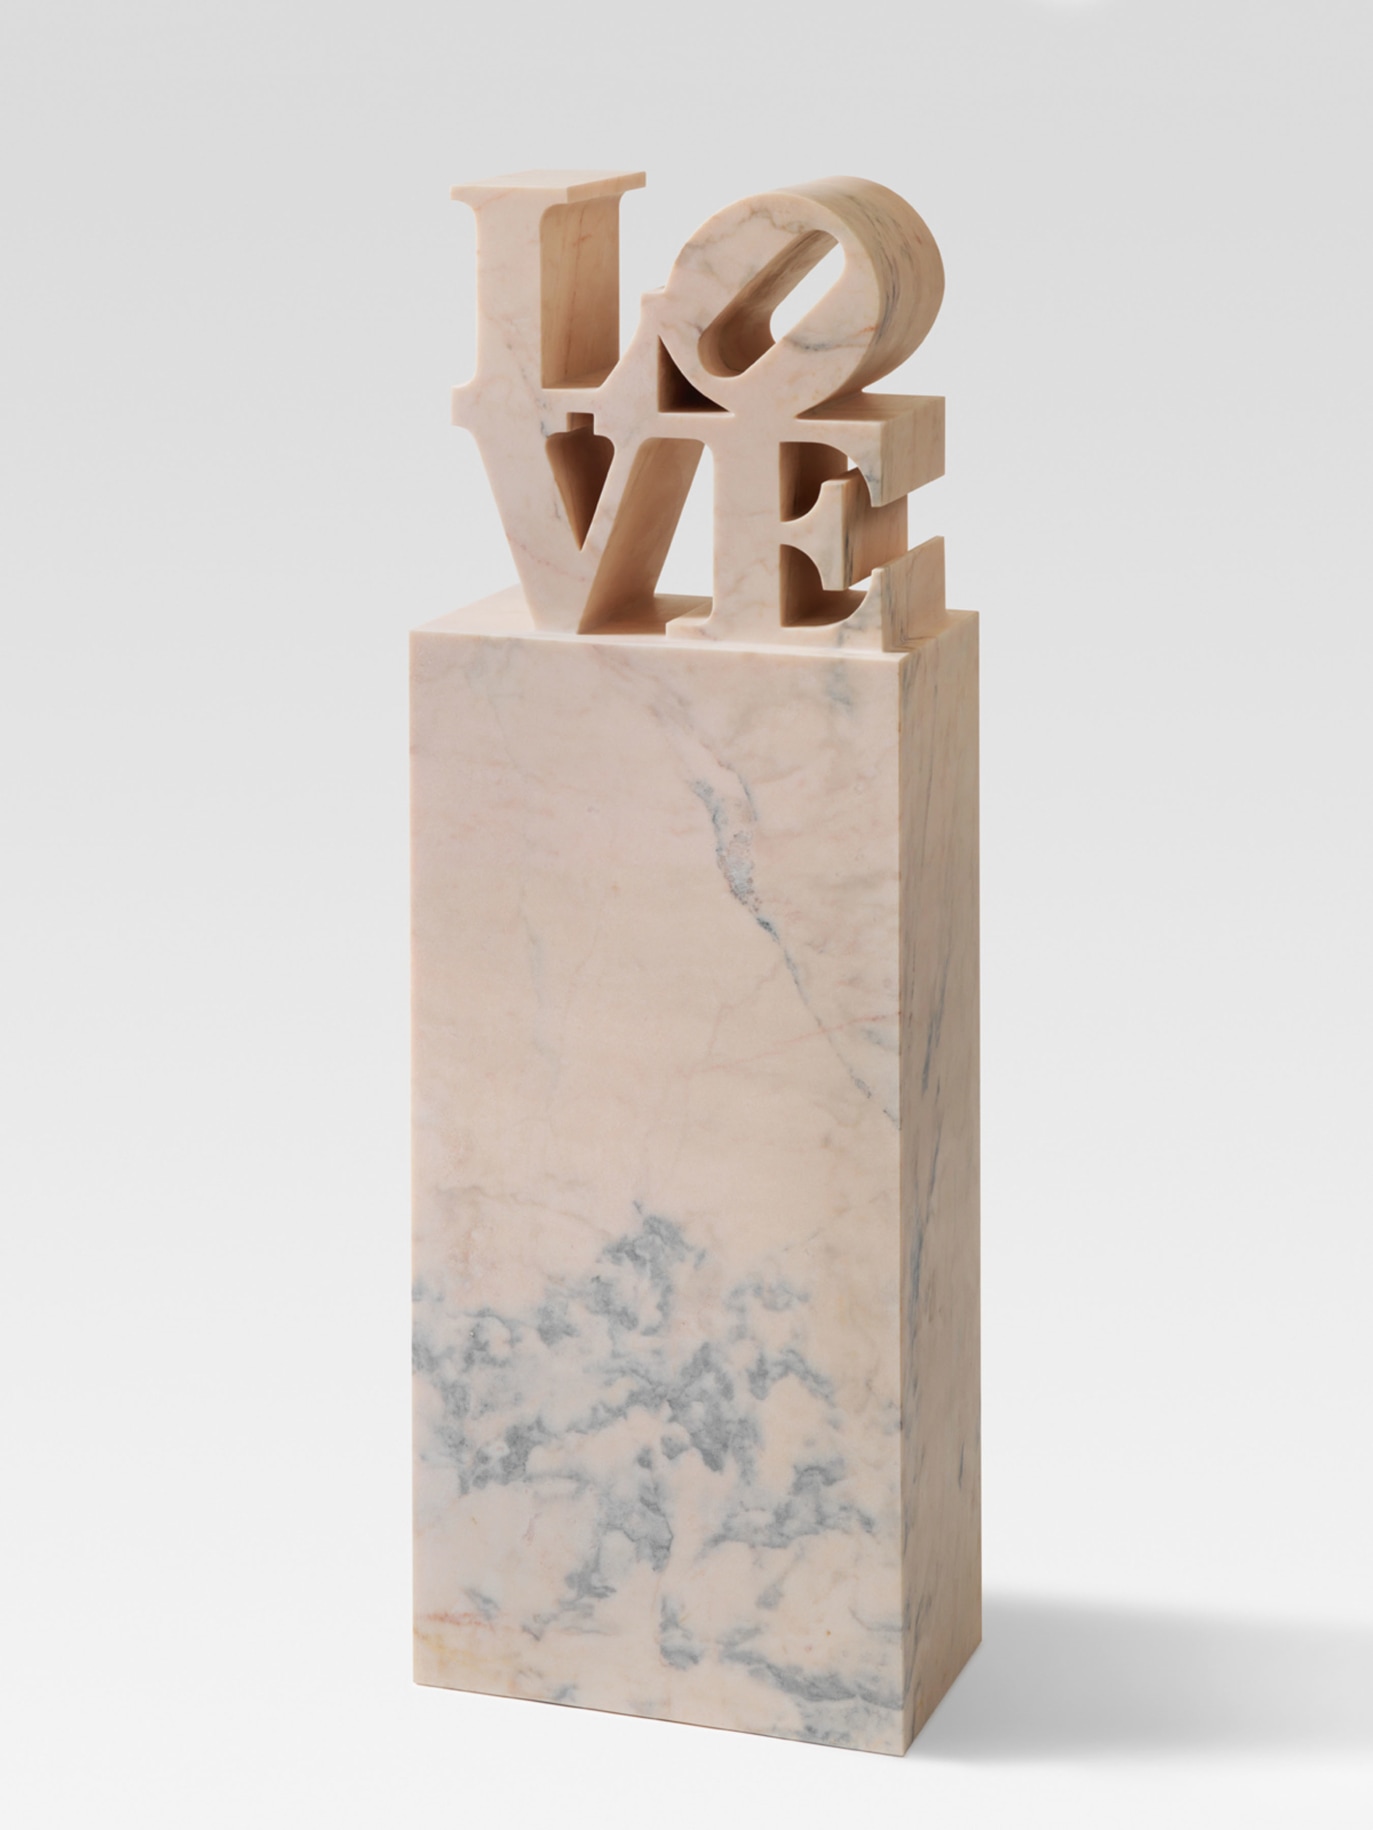 LOVE, a 65 15/16 &times; 22 1/8 &times; 12 5/16 inch, including the base, pink marble sculpture with the letters L and a tilted O stacked above the letters V and E, atop a tall rectangular base.